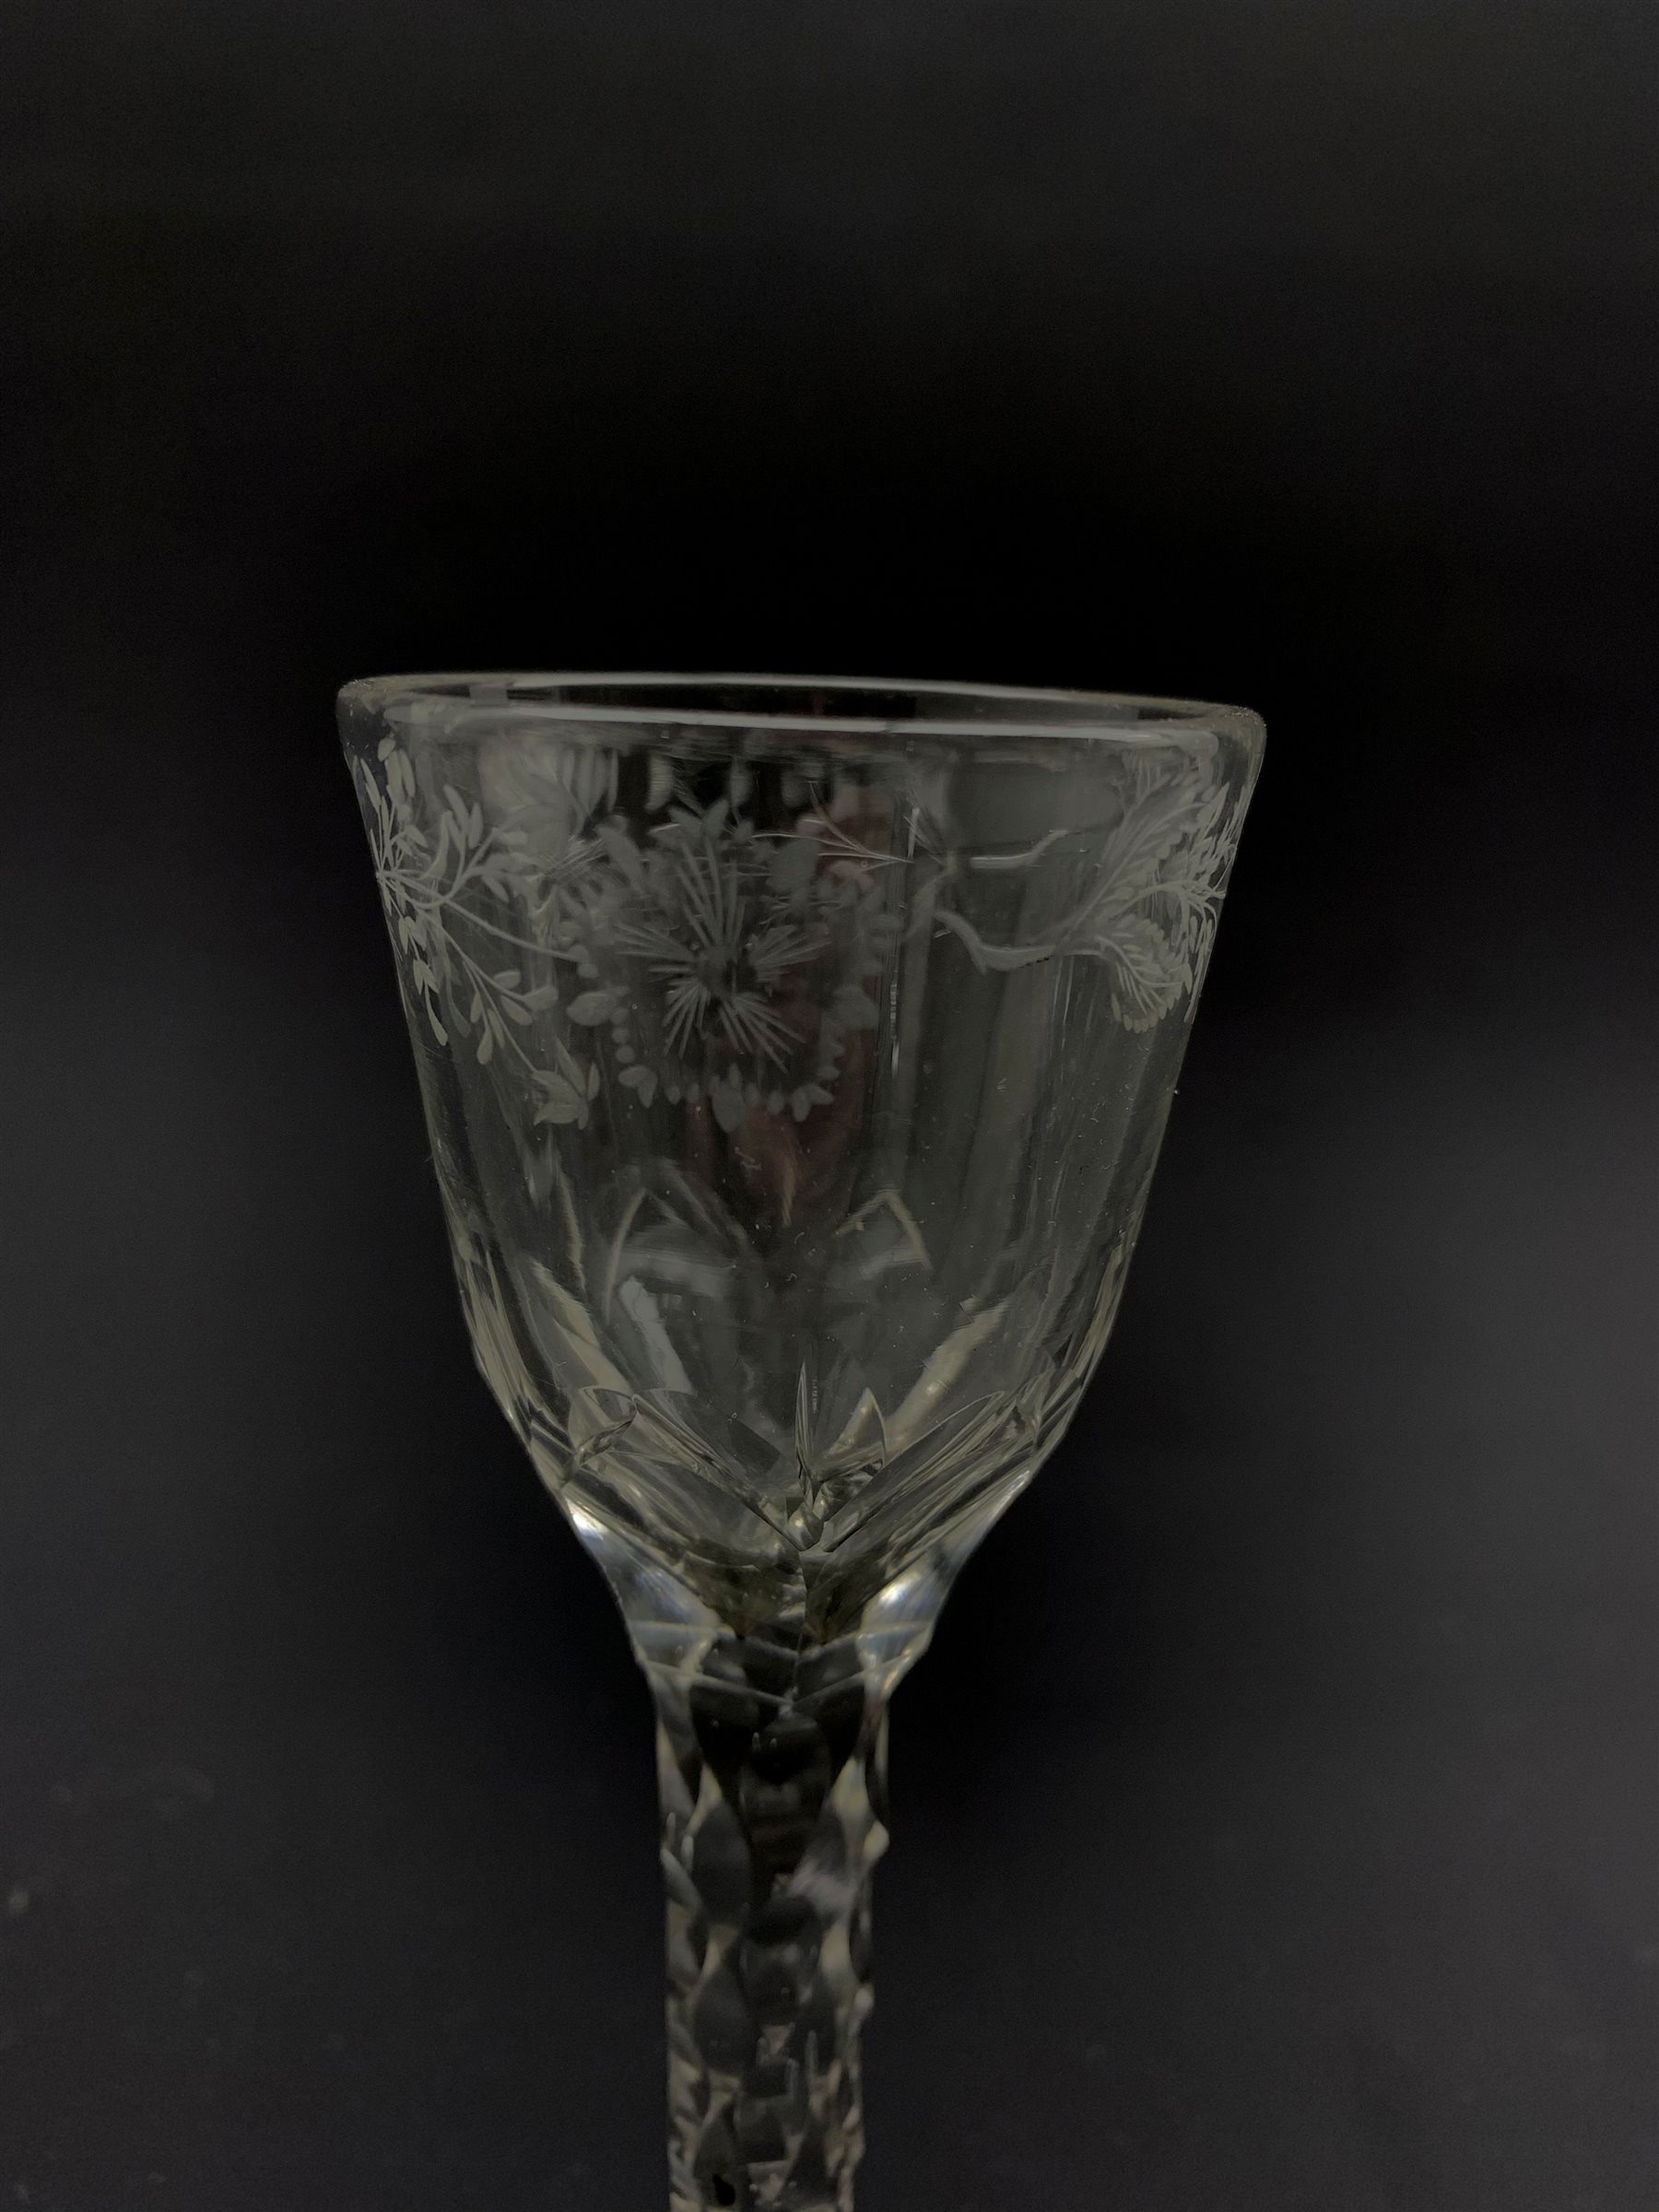 Set of three 18th century wine glasses, the ovoid bowls engraved with flower sprigs on faceted stems - Image 2 of 4